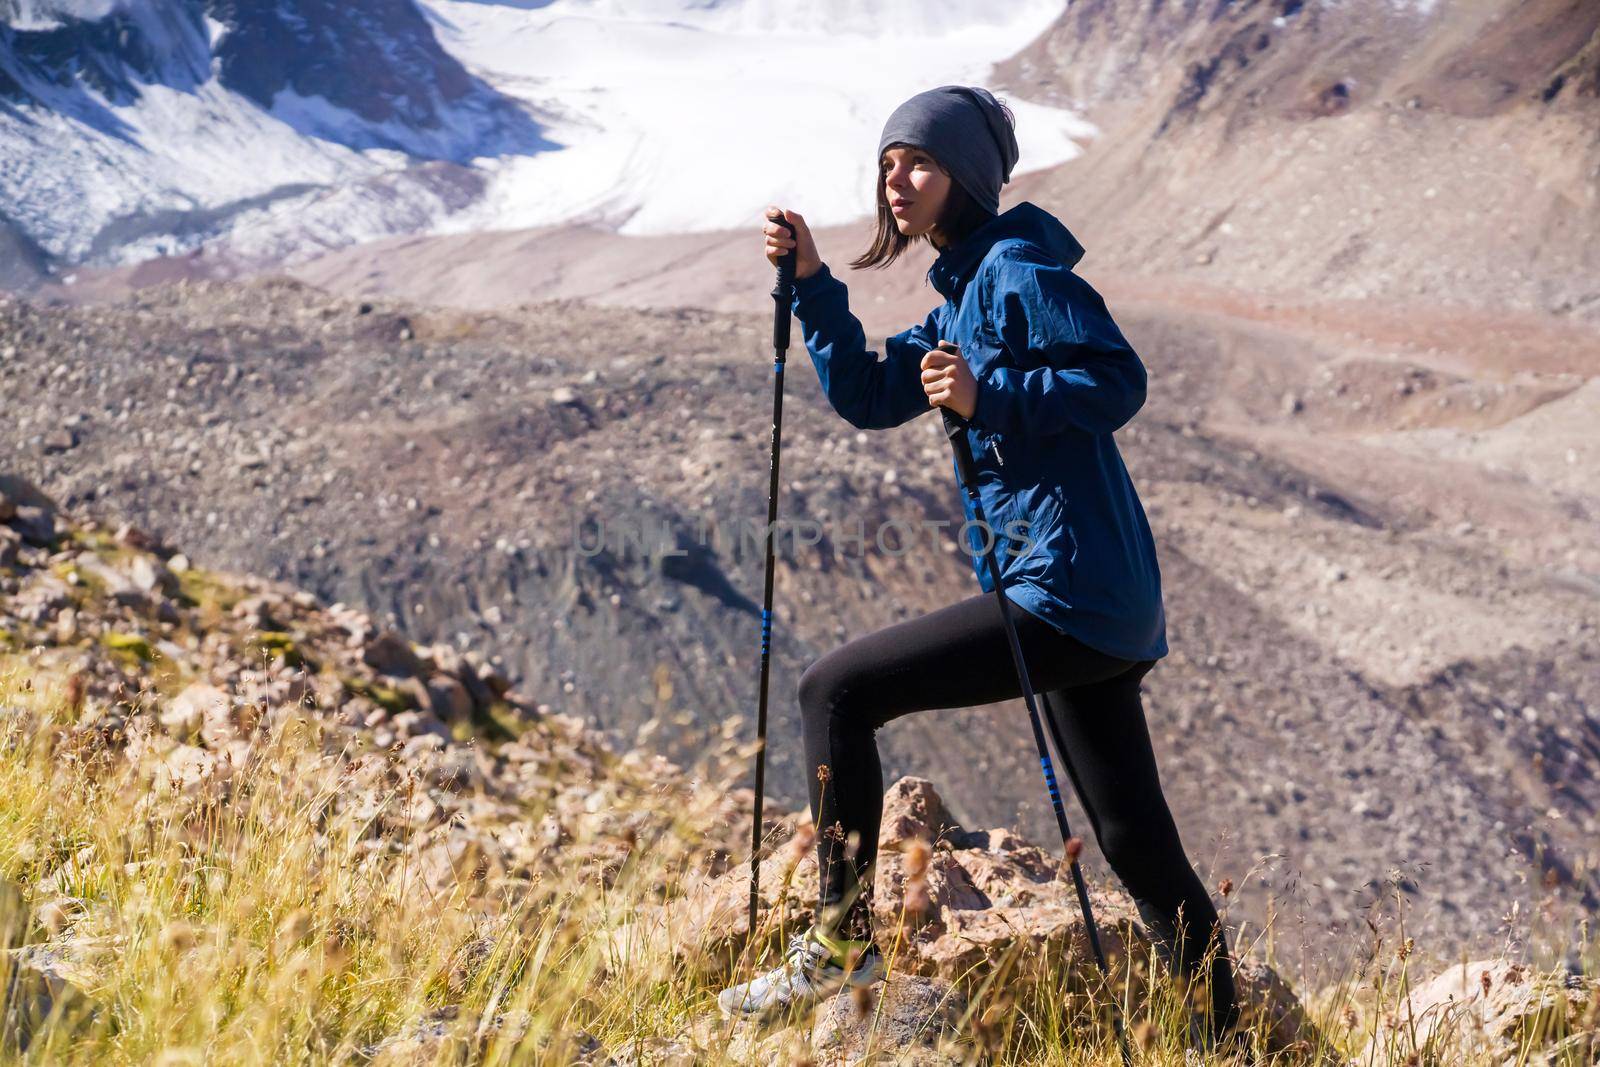 A young girl leads an active lifestyle, climbs a trail in the mountains with trekking poles, snow-capped mountain peaks and a glacier in the background.